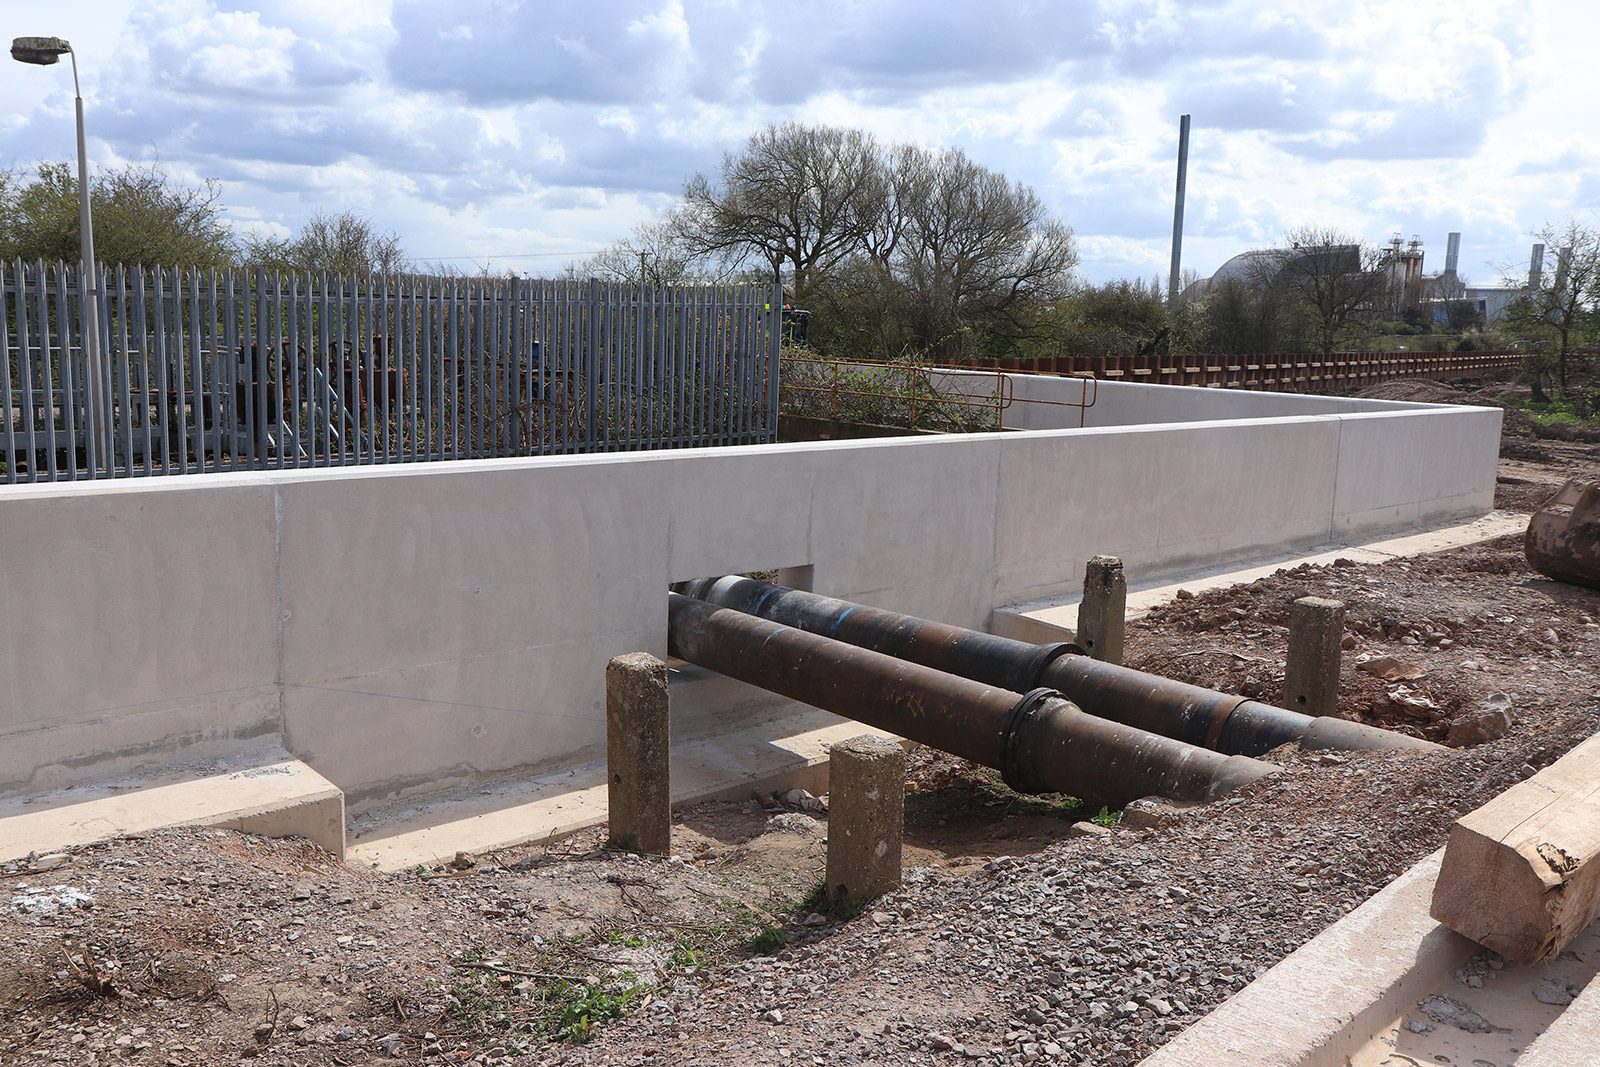 Flood defence wall cast around pipelines - April 2022